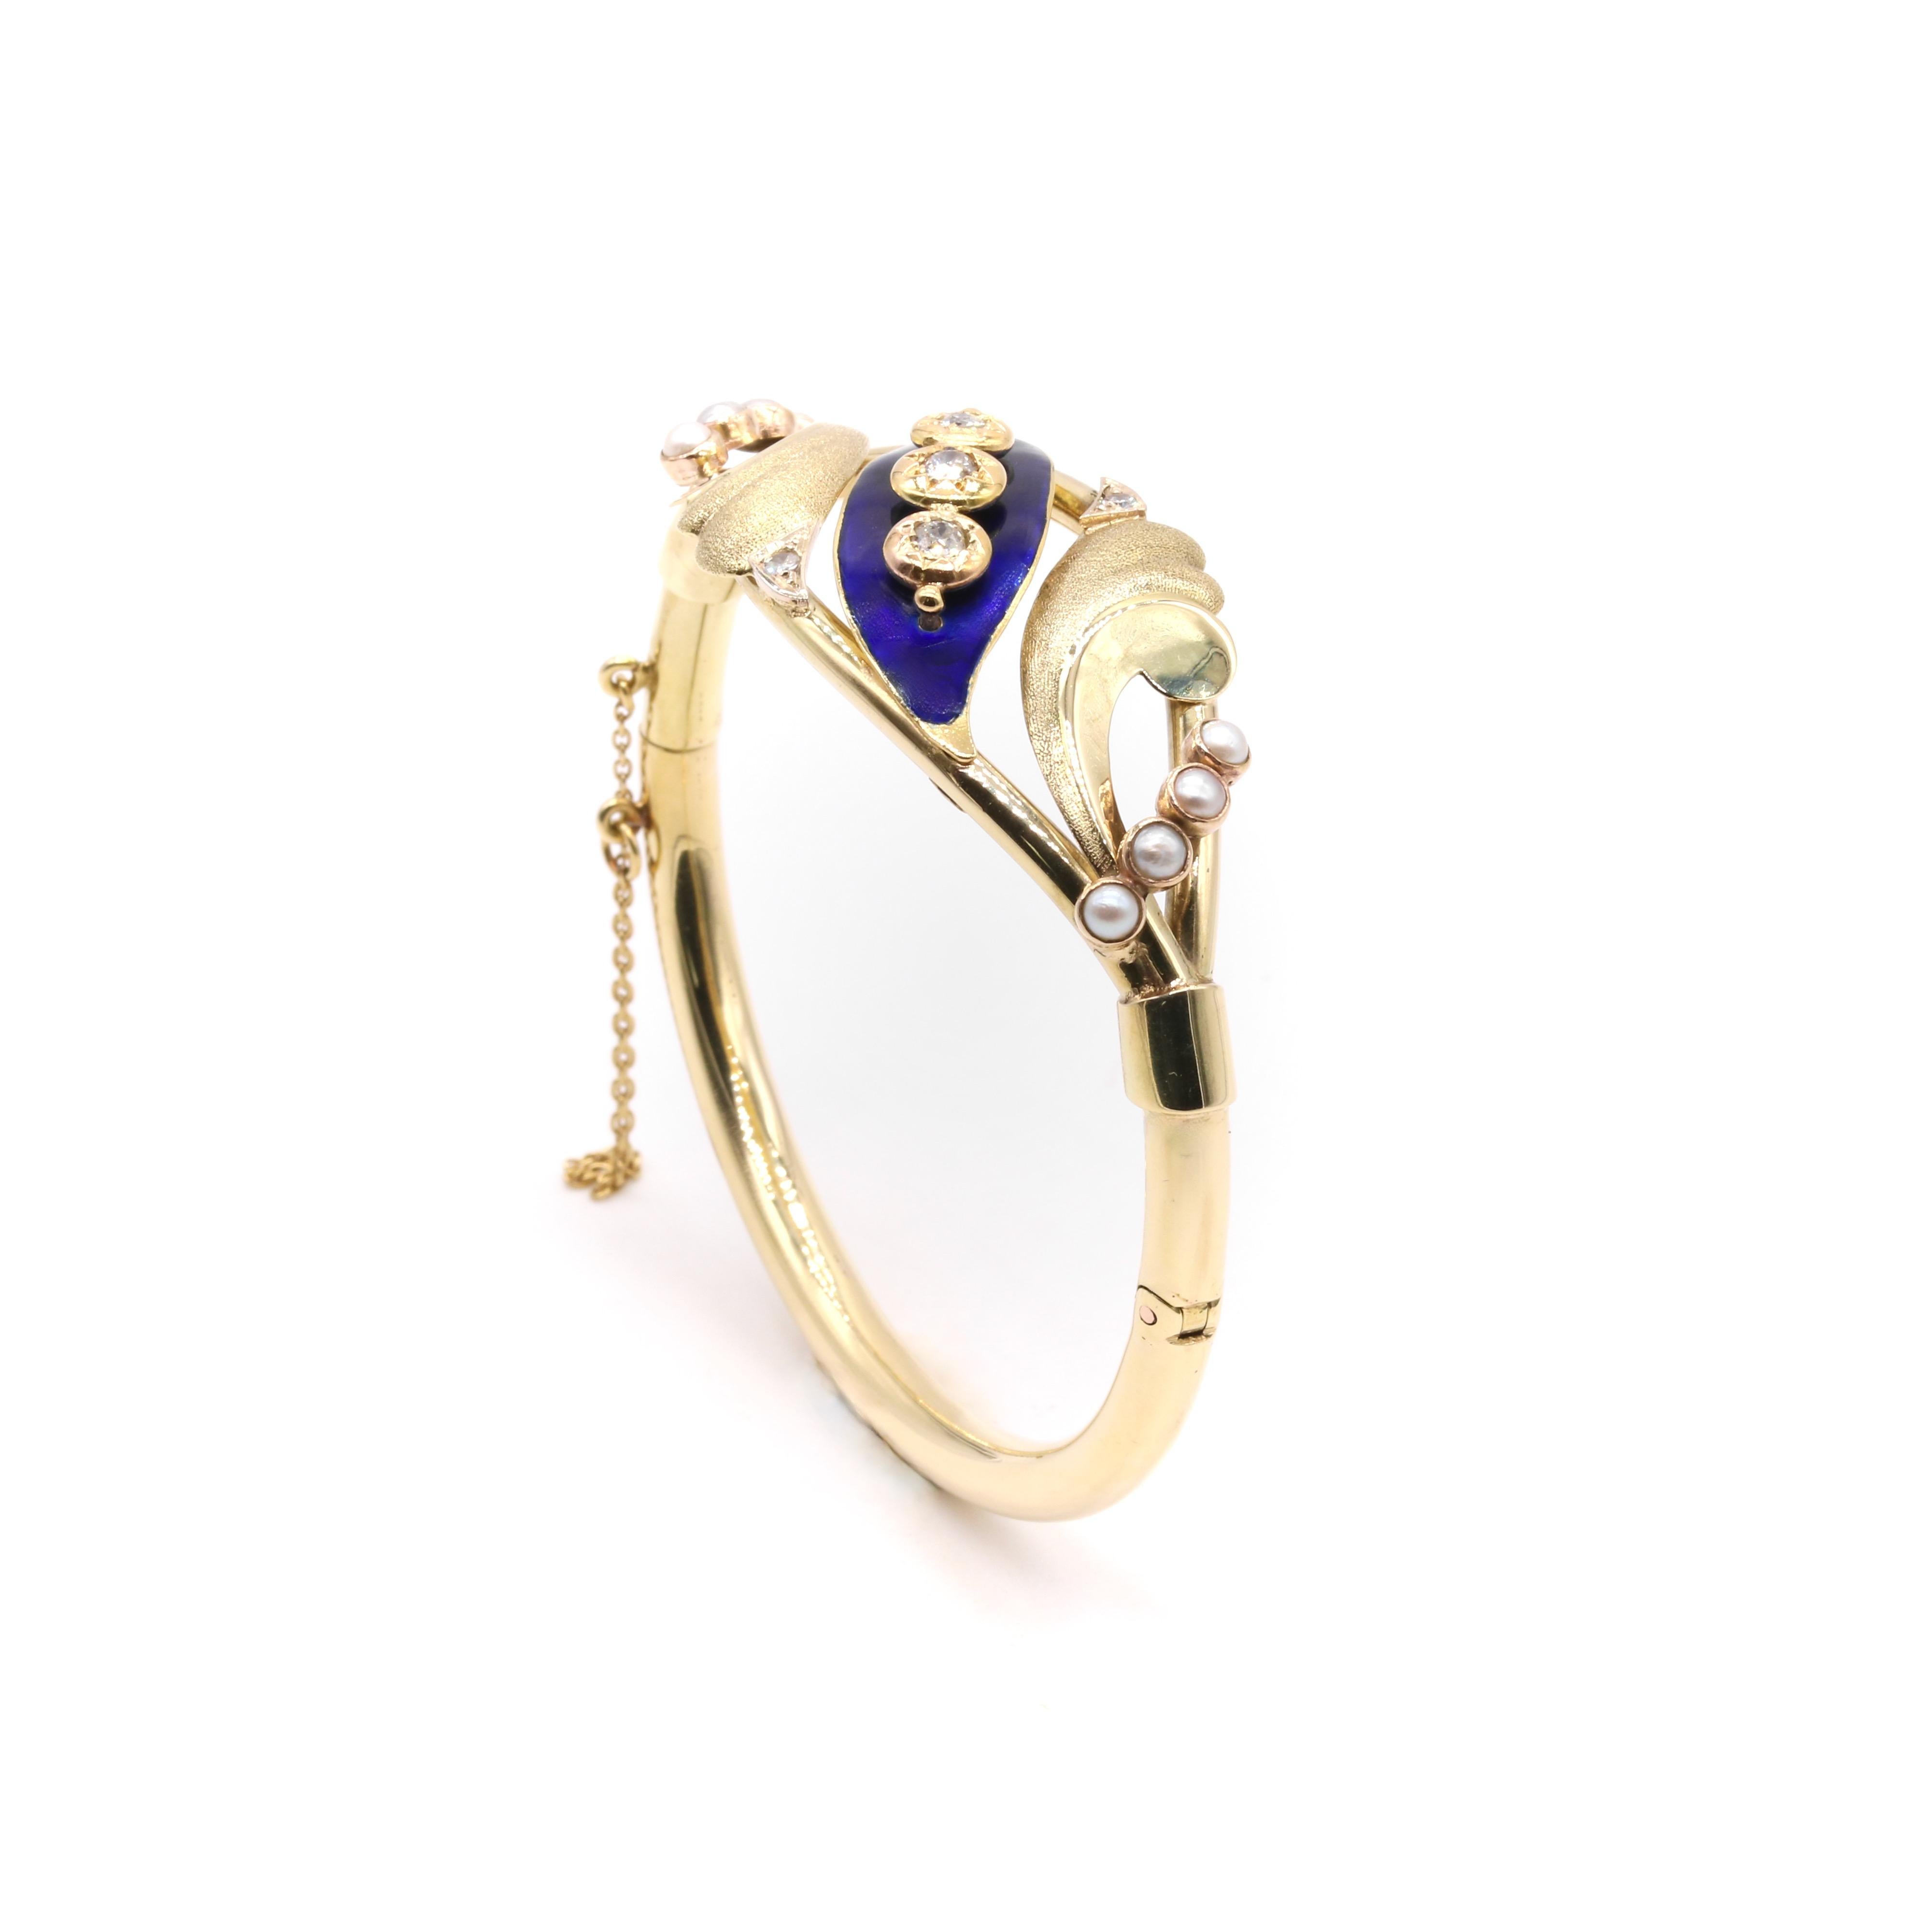 Antique Victorian 27g 14K Yellow Gold Diamond, Pearl and Blue Enamel Bracelet For Sale 3